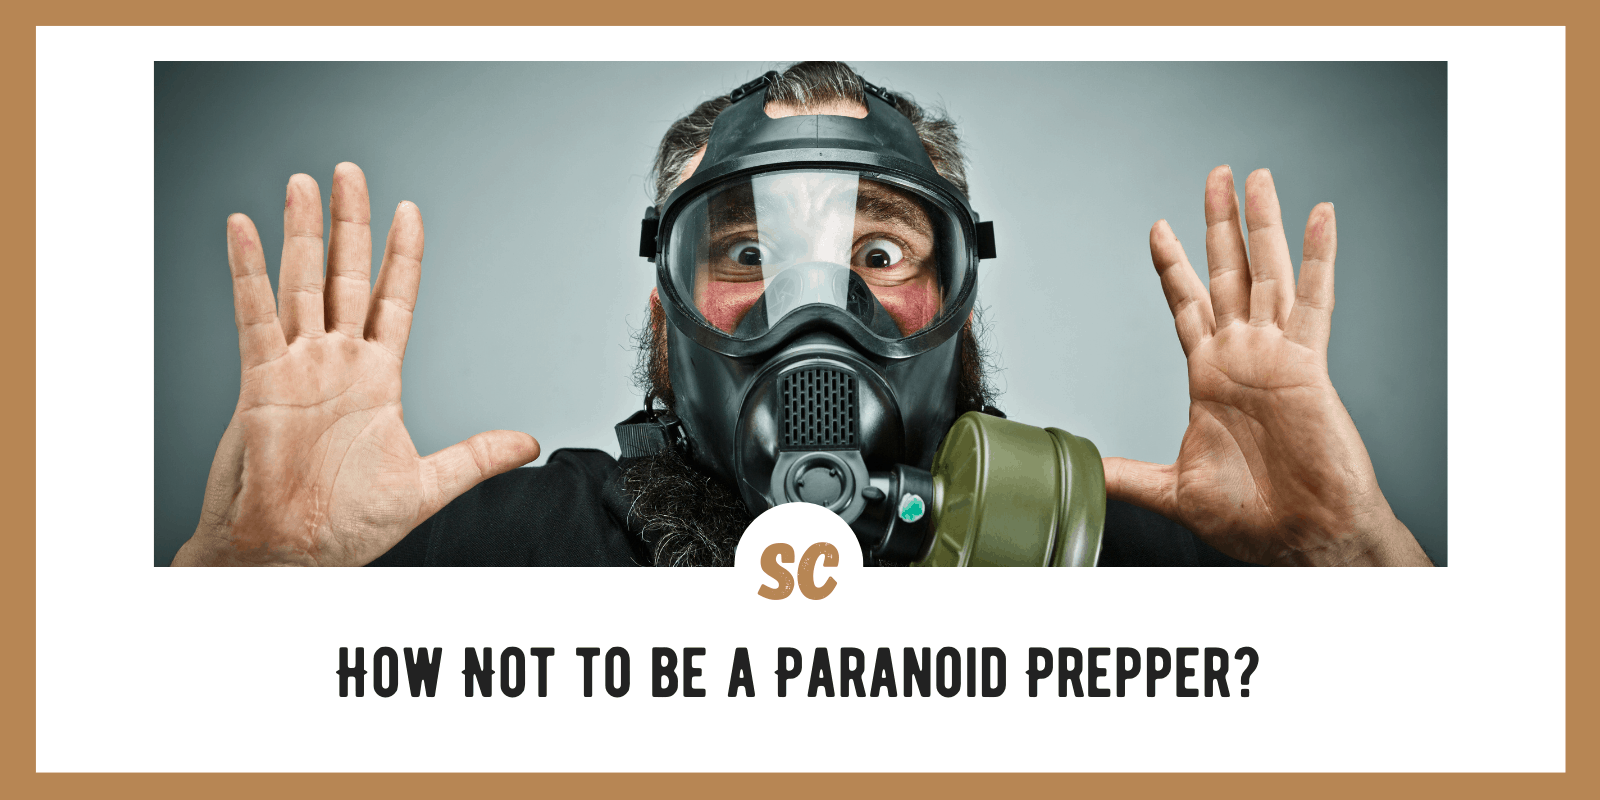 How Not To Be a Paranoid Prepper: My Insights 